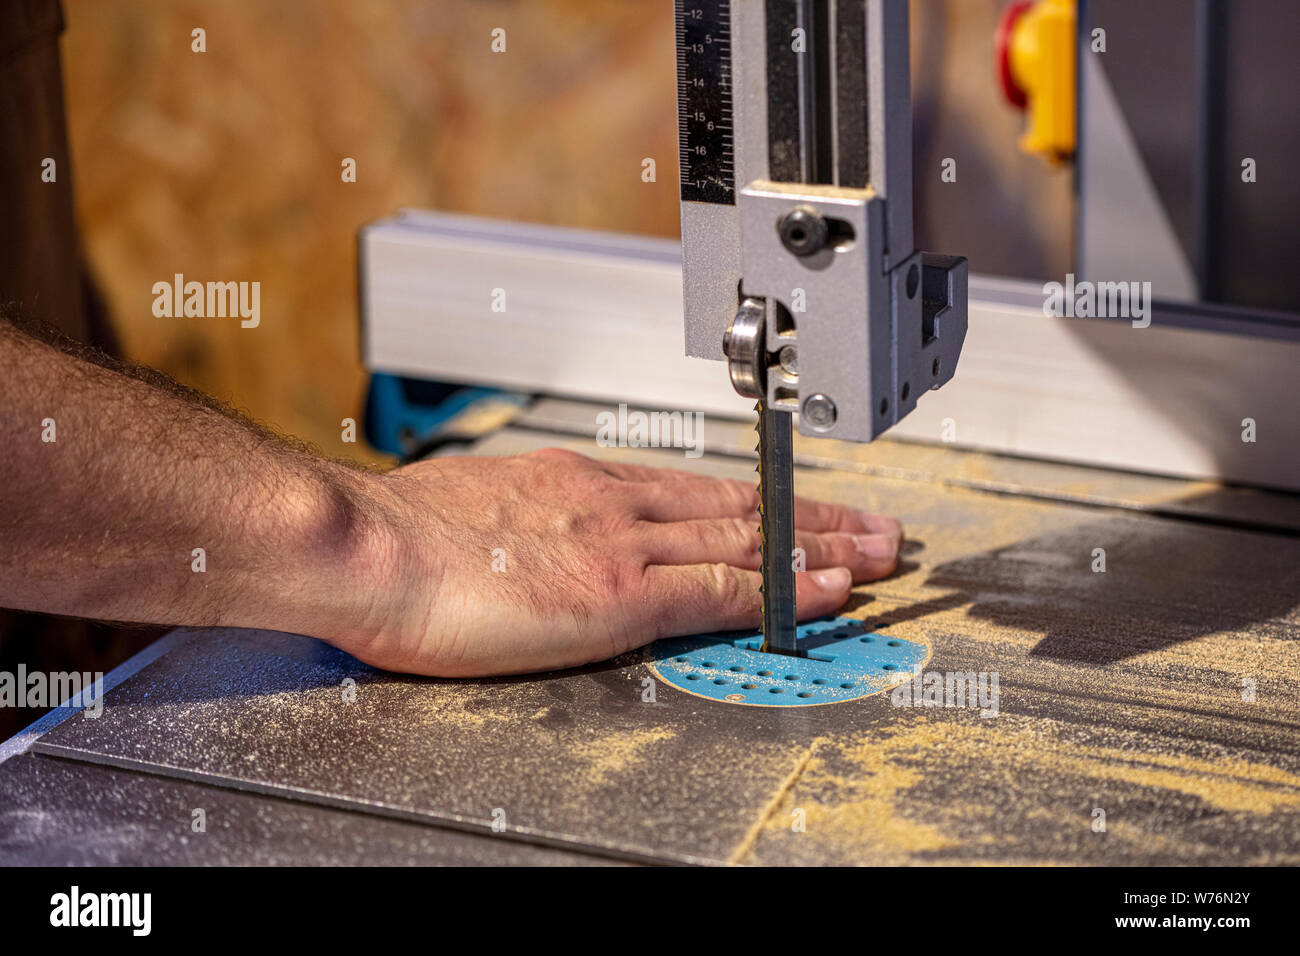 detail of a carpenter's band saw and a hand placed in the wrong and dangerous position. work safety concept. Stock Photo